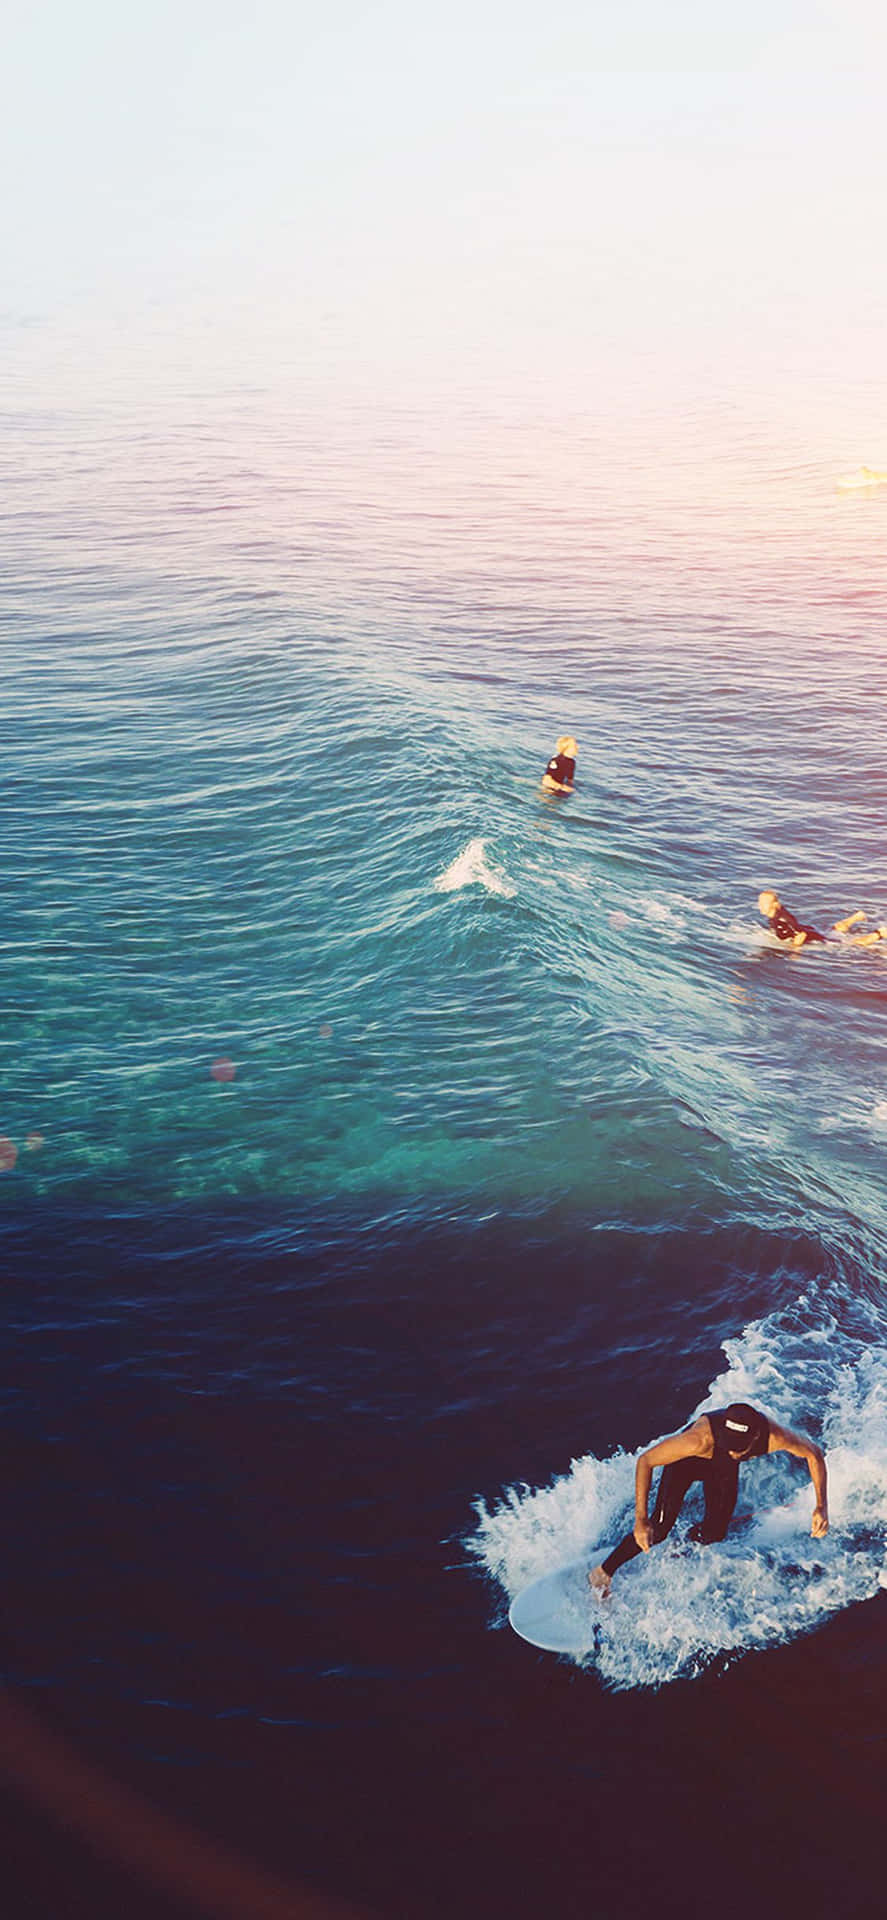 A Group Of People Riding A Wave In The Ocean Wallpaper